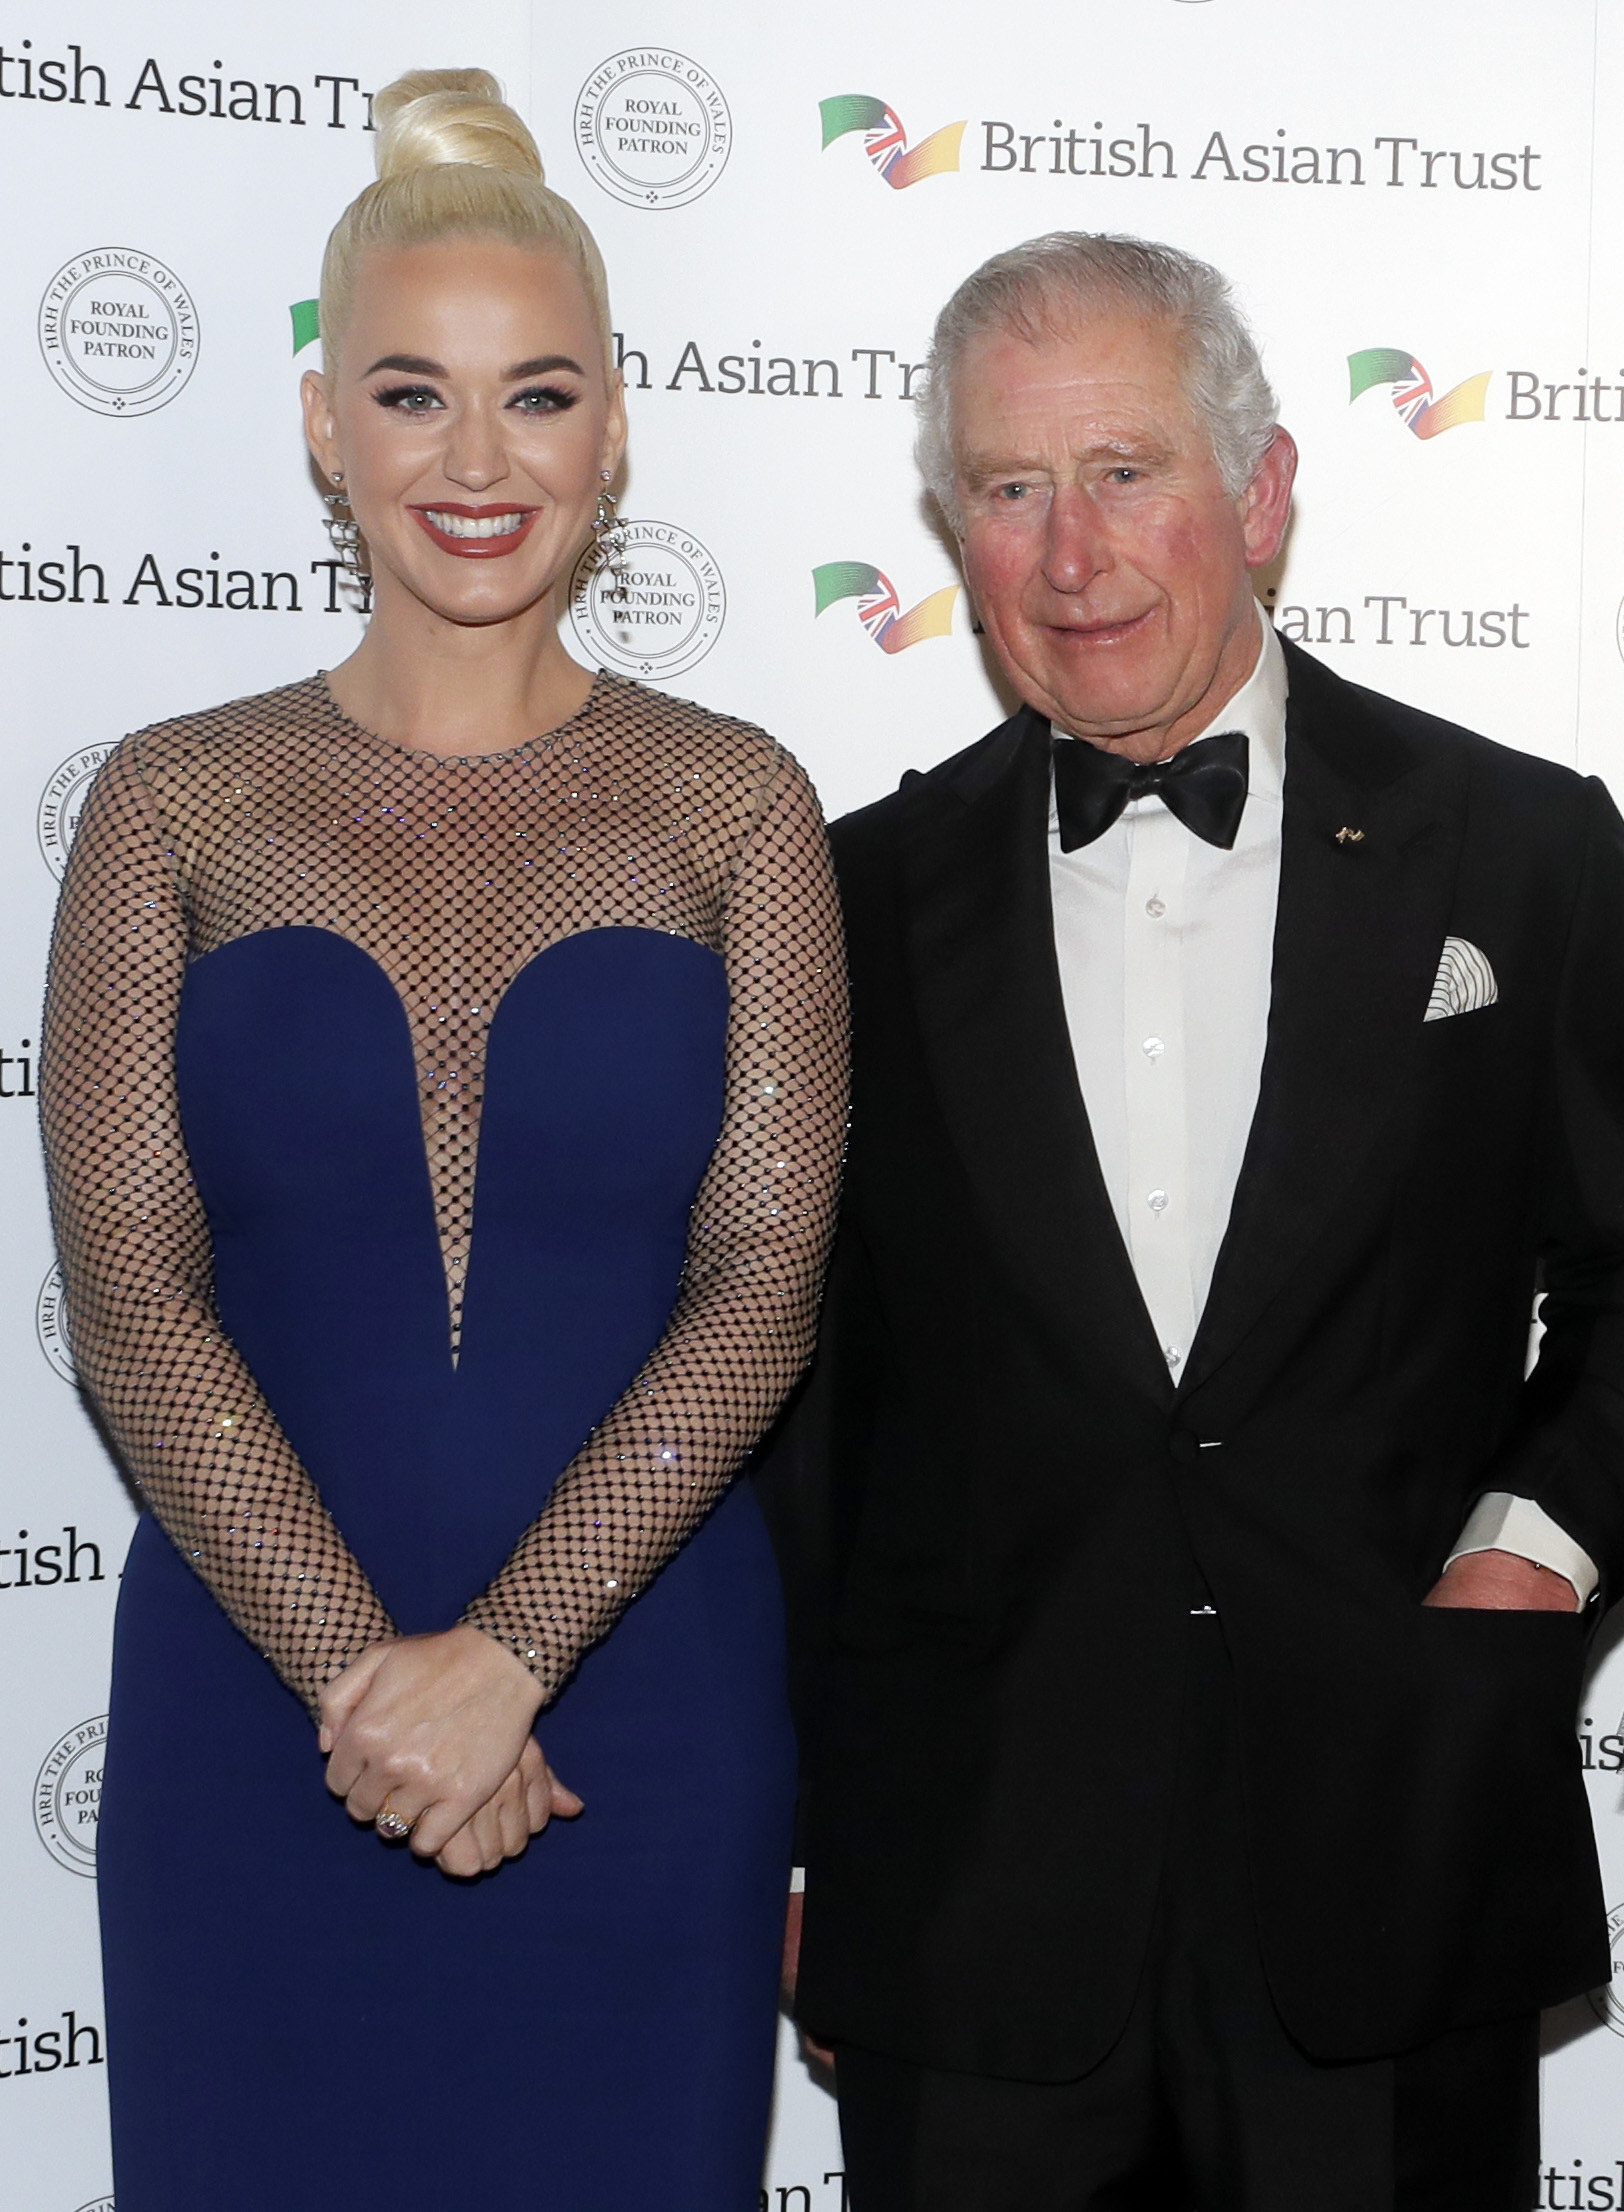 Katy and Charles standing together